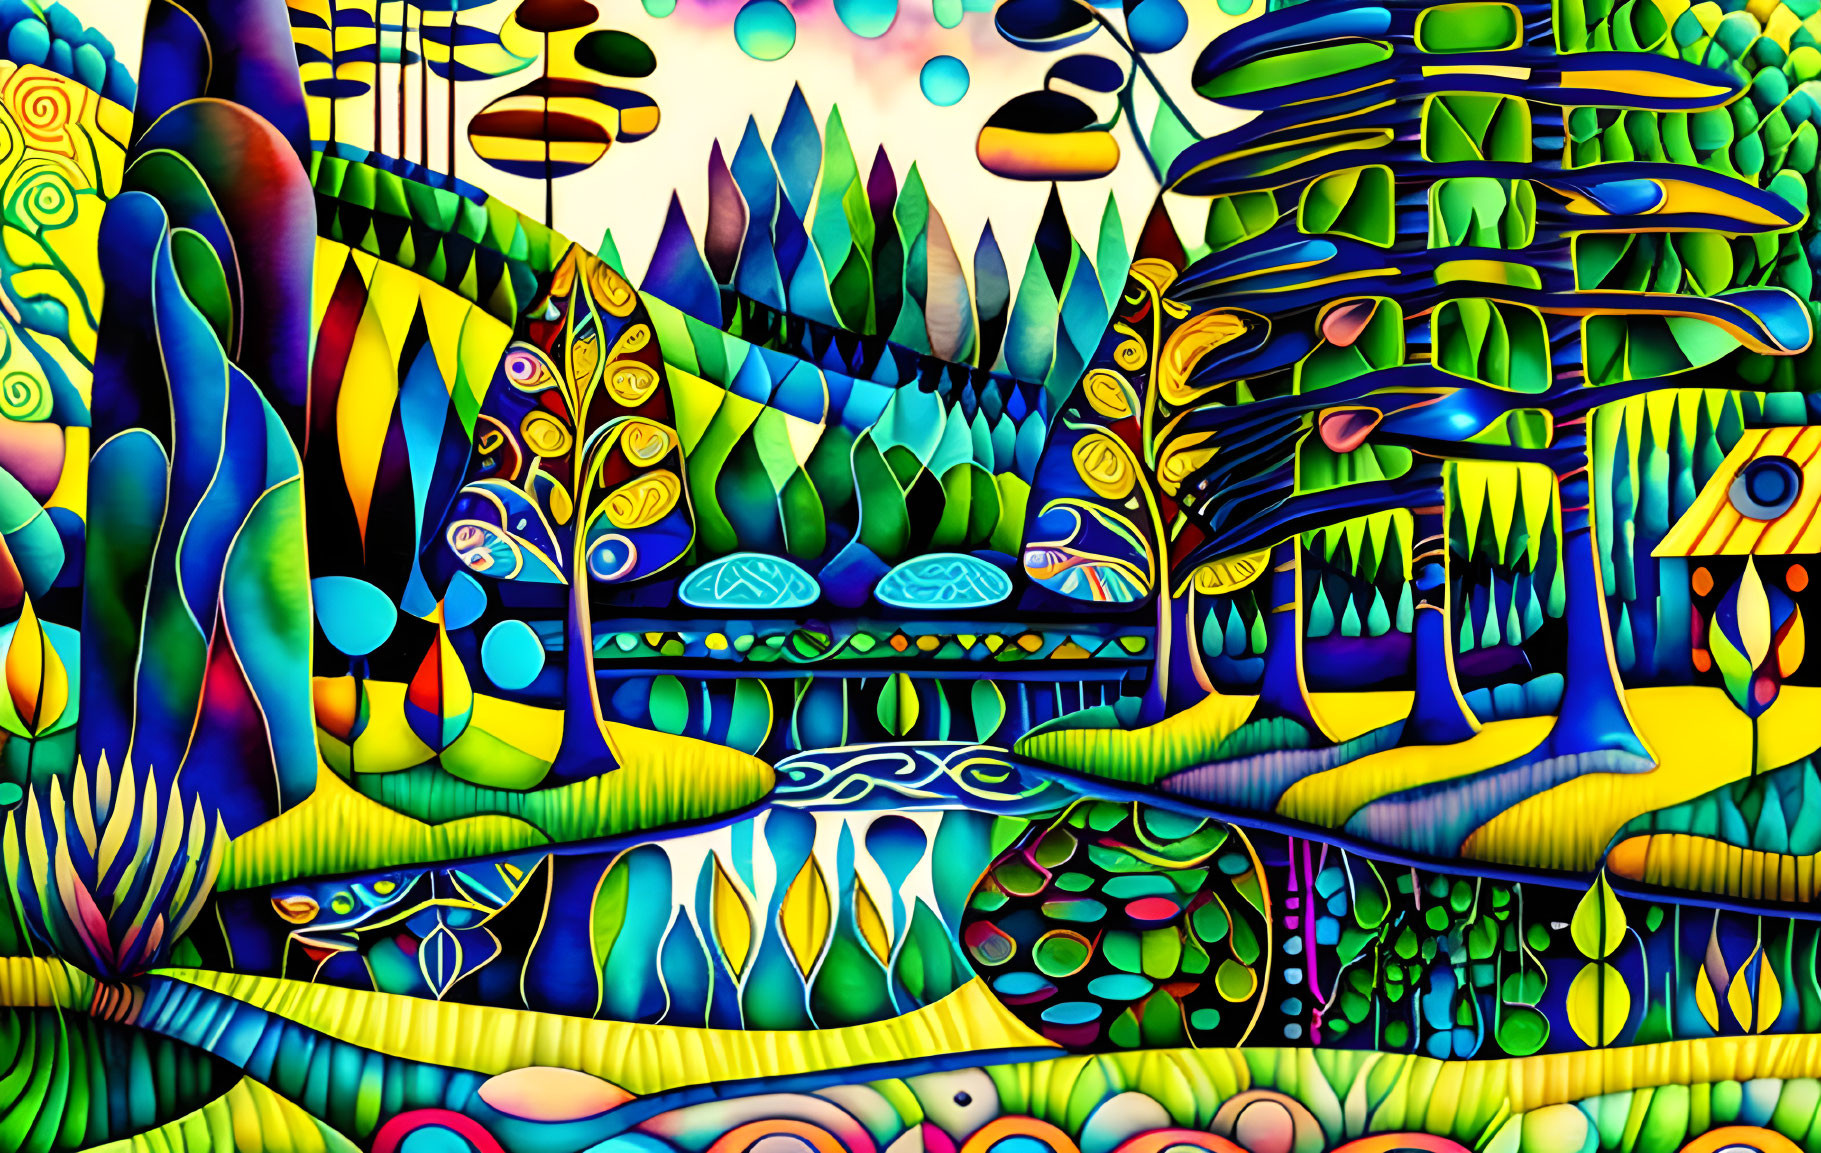 Abstract Psychedelic Landscape with Vibrant Colors and Natural Elements